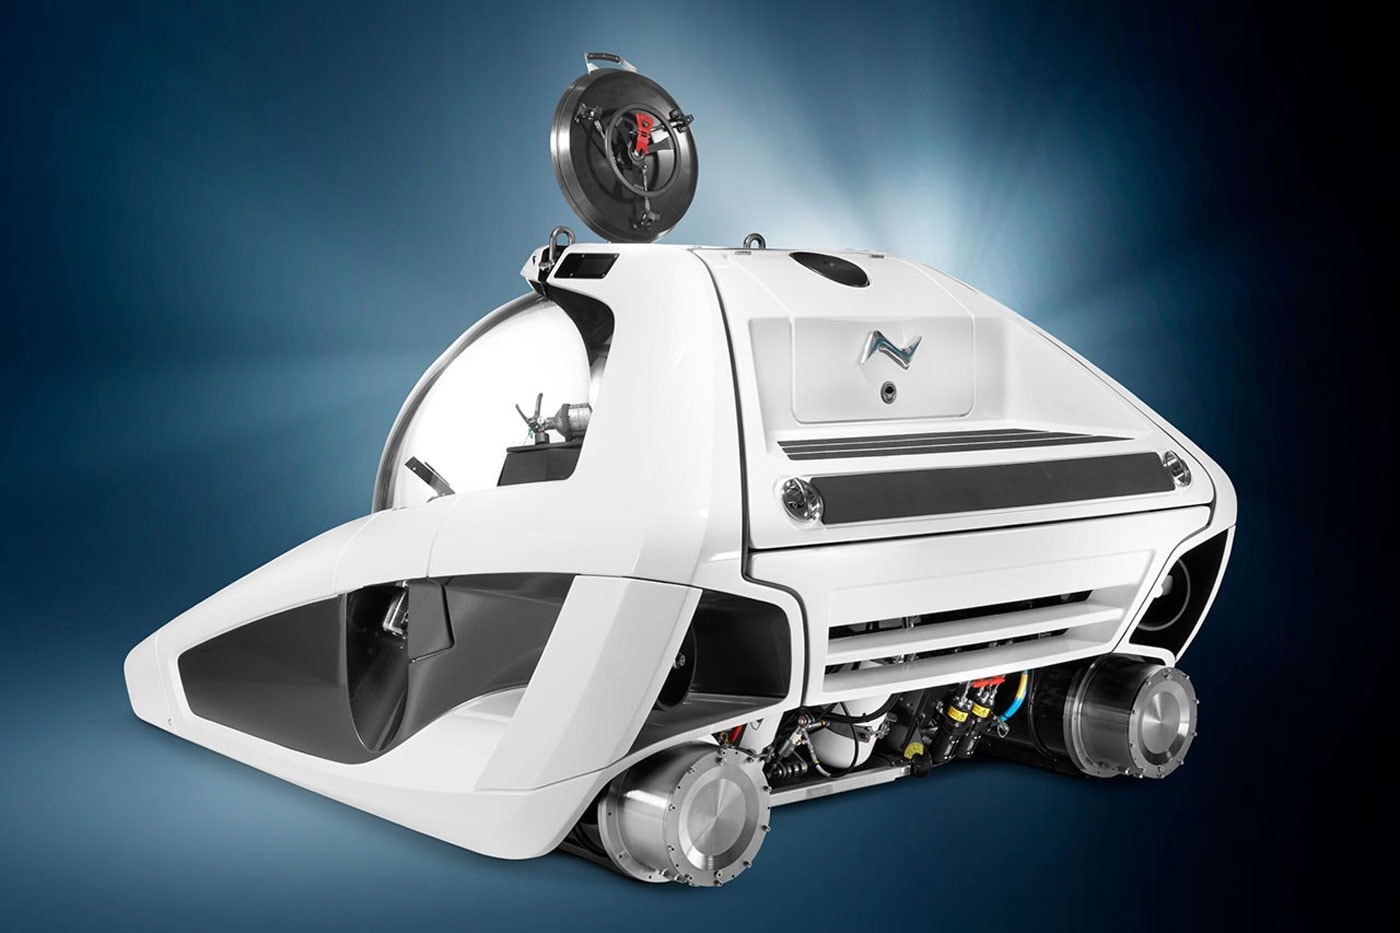 U boat worx submersibles submarine deep sea exploration 100 meter 2 seater inidividual use release info 